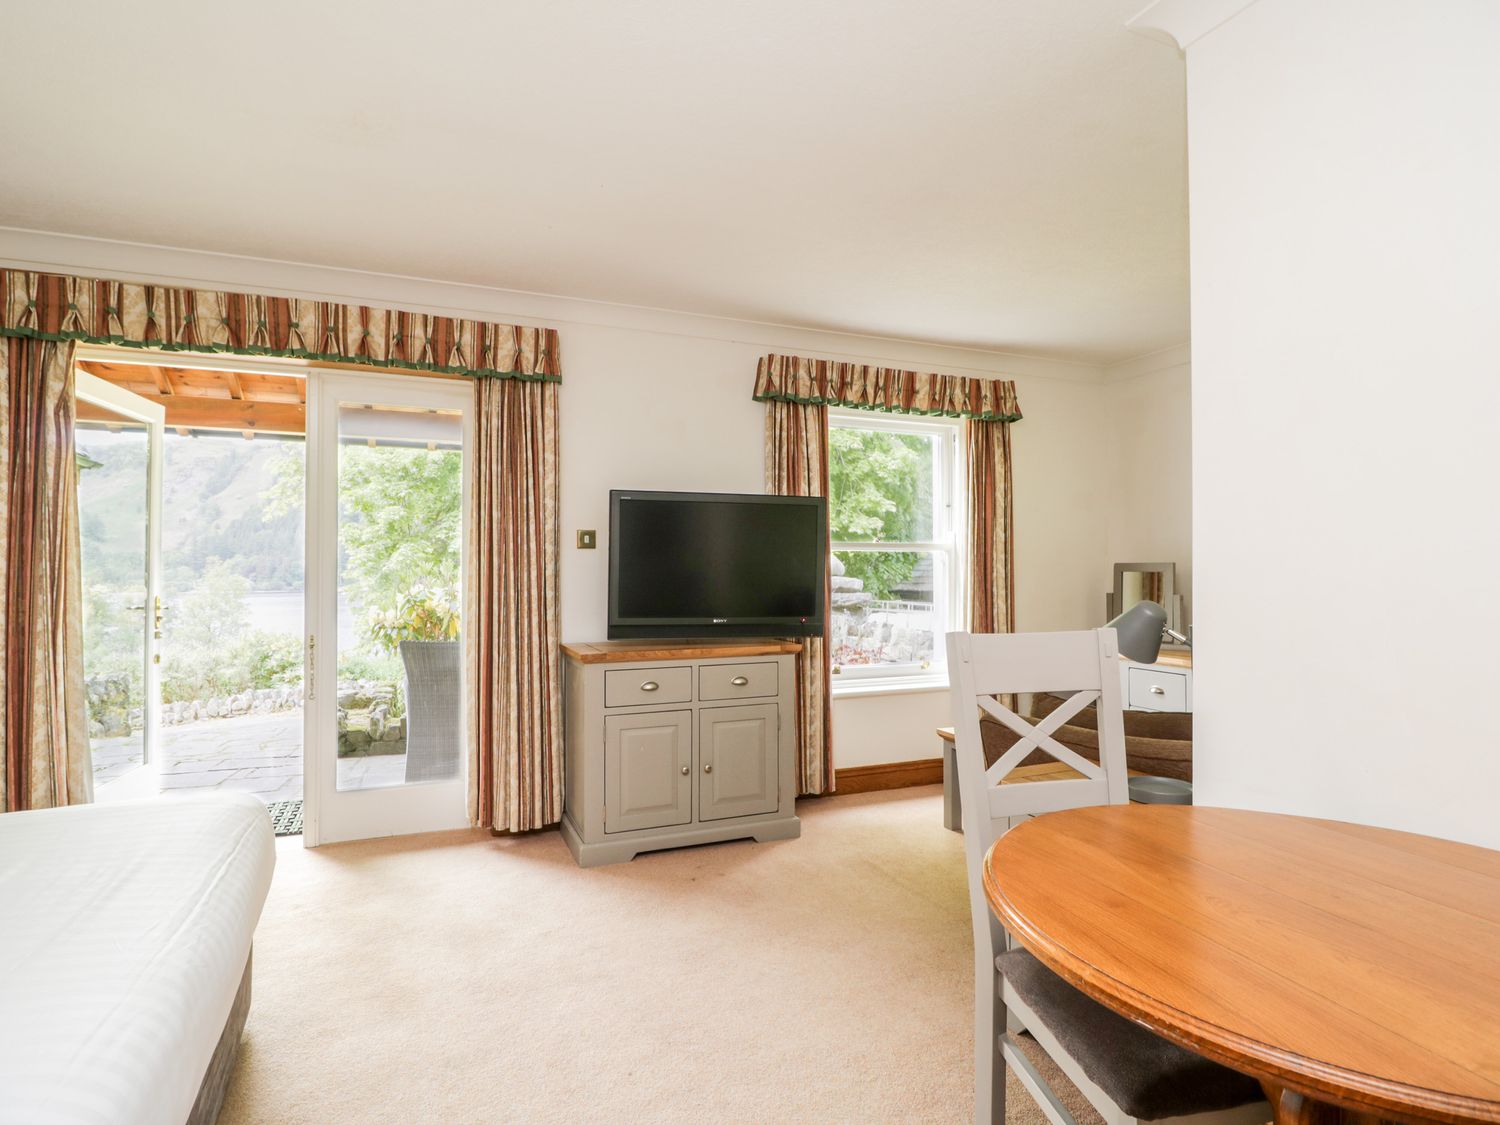 Thirlmere Suite, Lake District